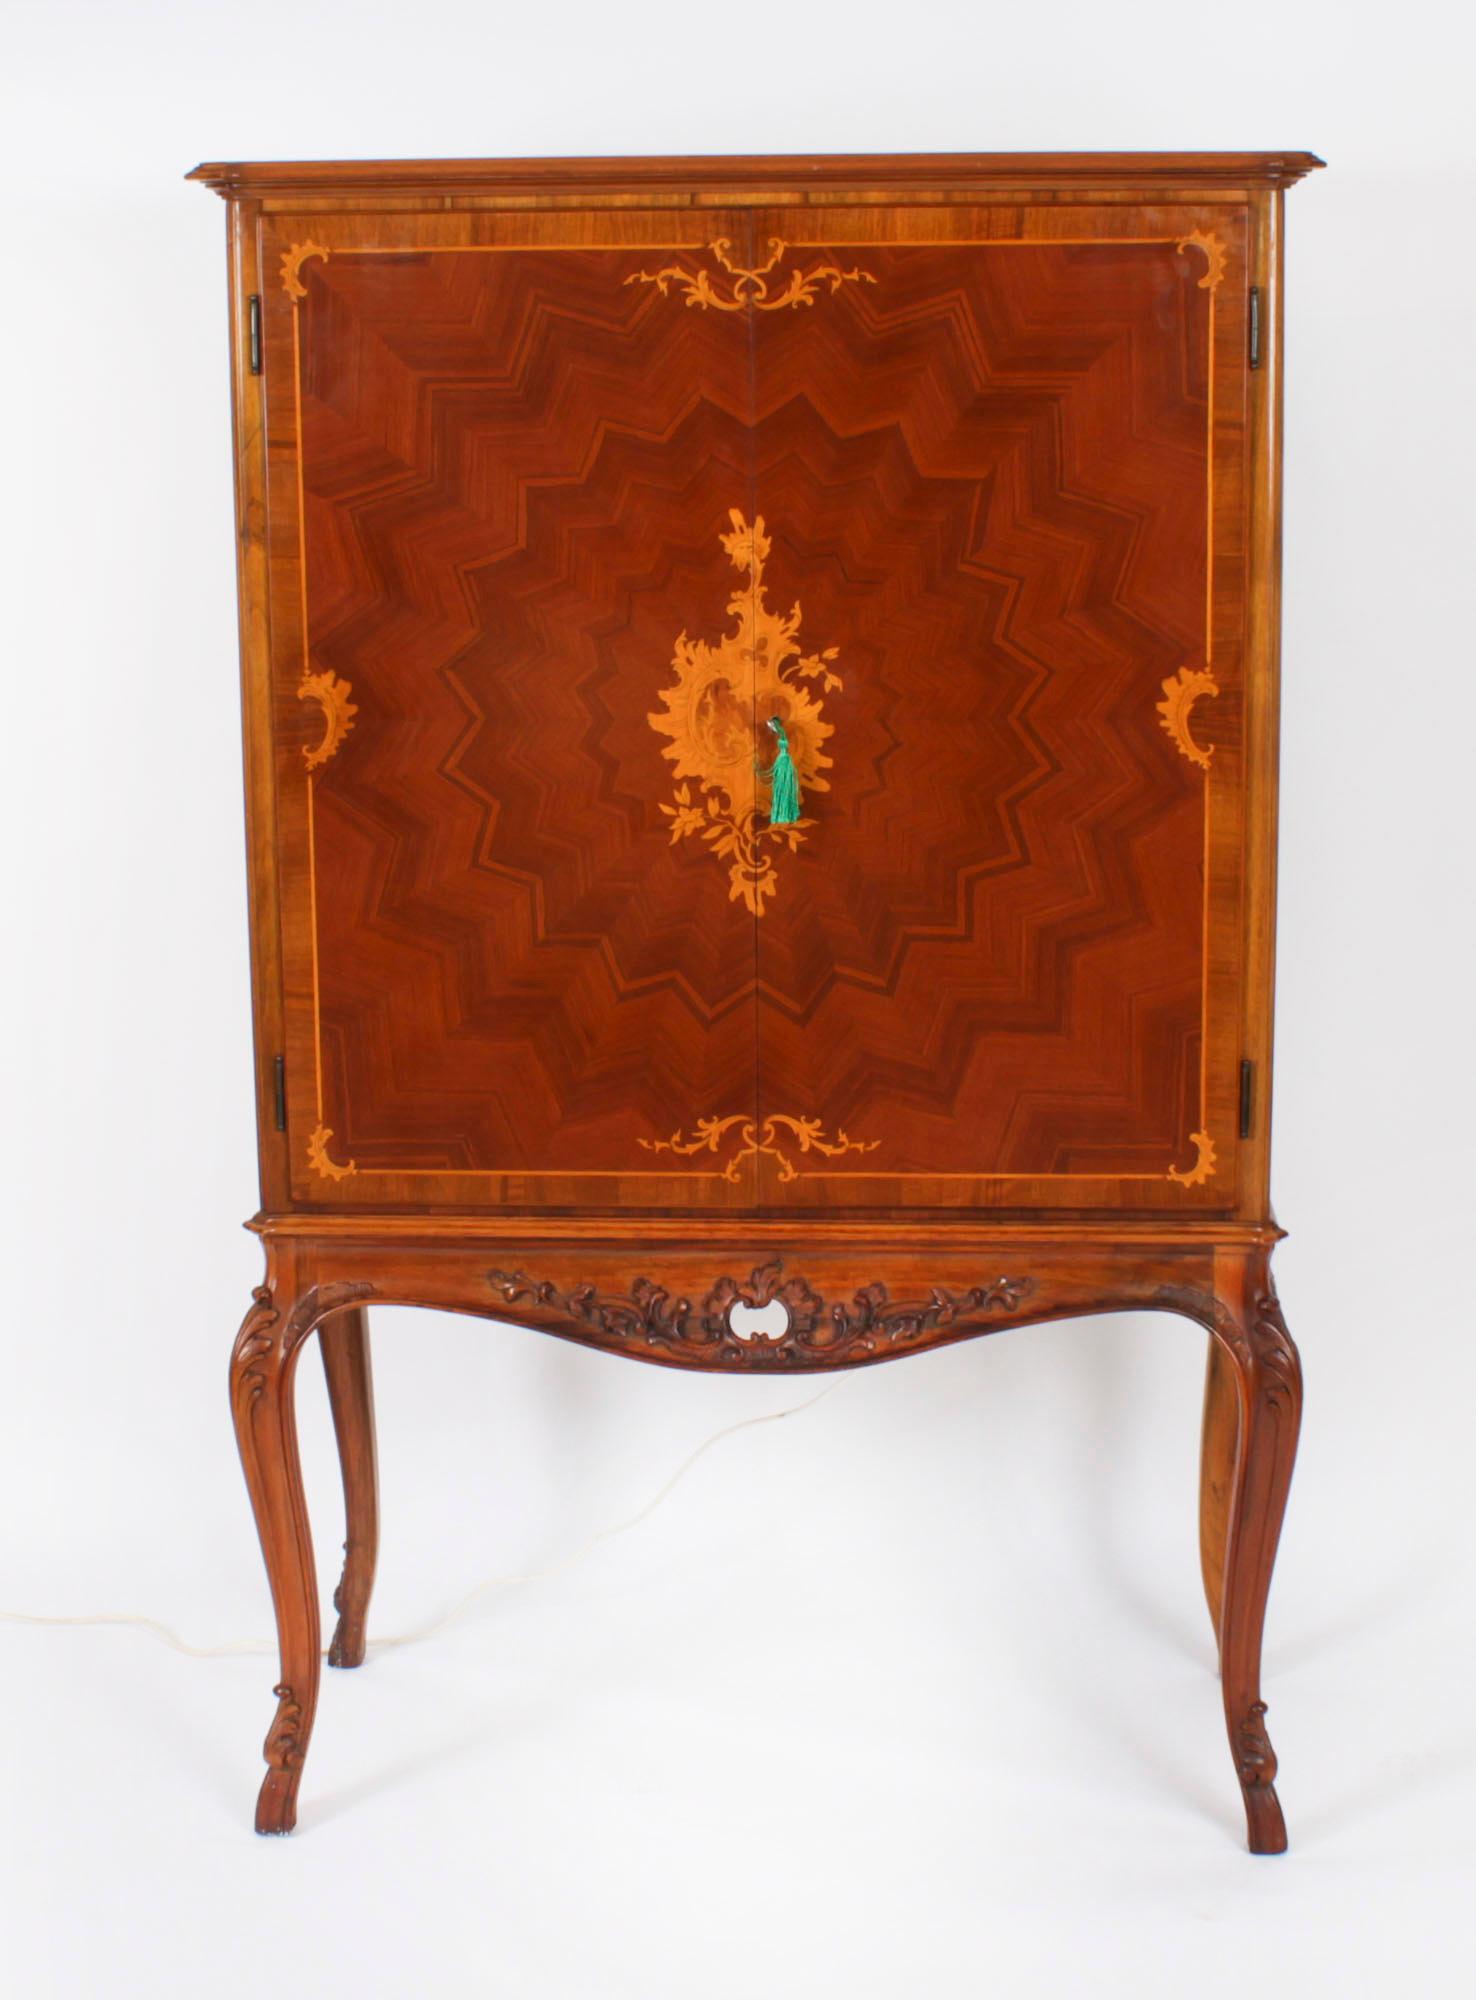 This is a stupendous vintage Italian Mid Century marquetry inlaid burr walnut drinks cabinet, Circa 1950 in date.

The pair of doors with central satinwood floral cartouche inlay and extending star pattern parquetry open to reveal a stunning maple